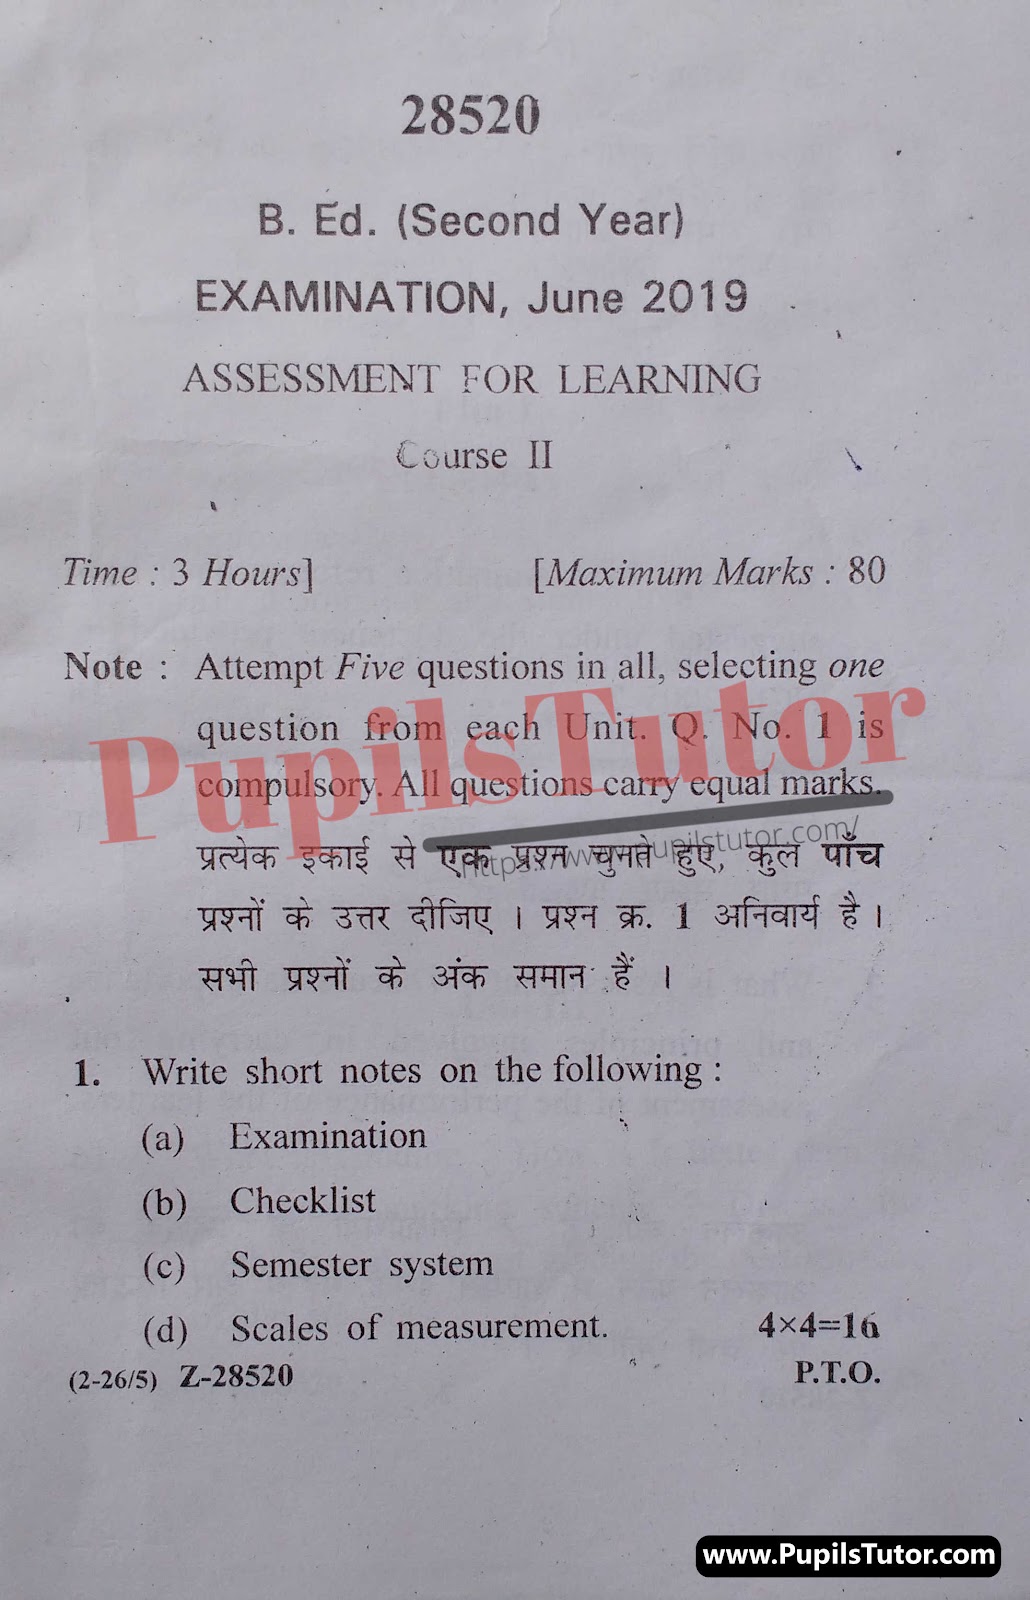 CRSU (Chaudhary Ranbir Singh University, Jind Haryana) BEd Regular Exam Second Year Previous Year Assessment For Learning Question Paper For June, 2019 Exam (Question Paper Page 1) - pupilstutor.com